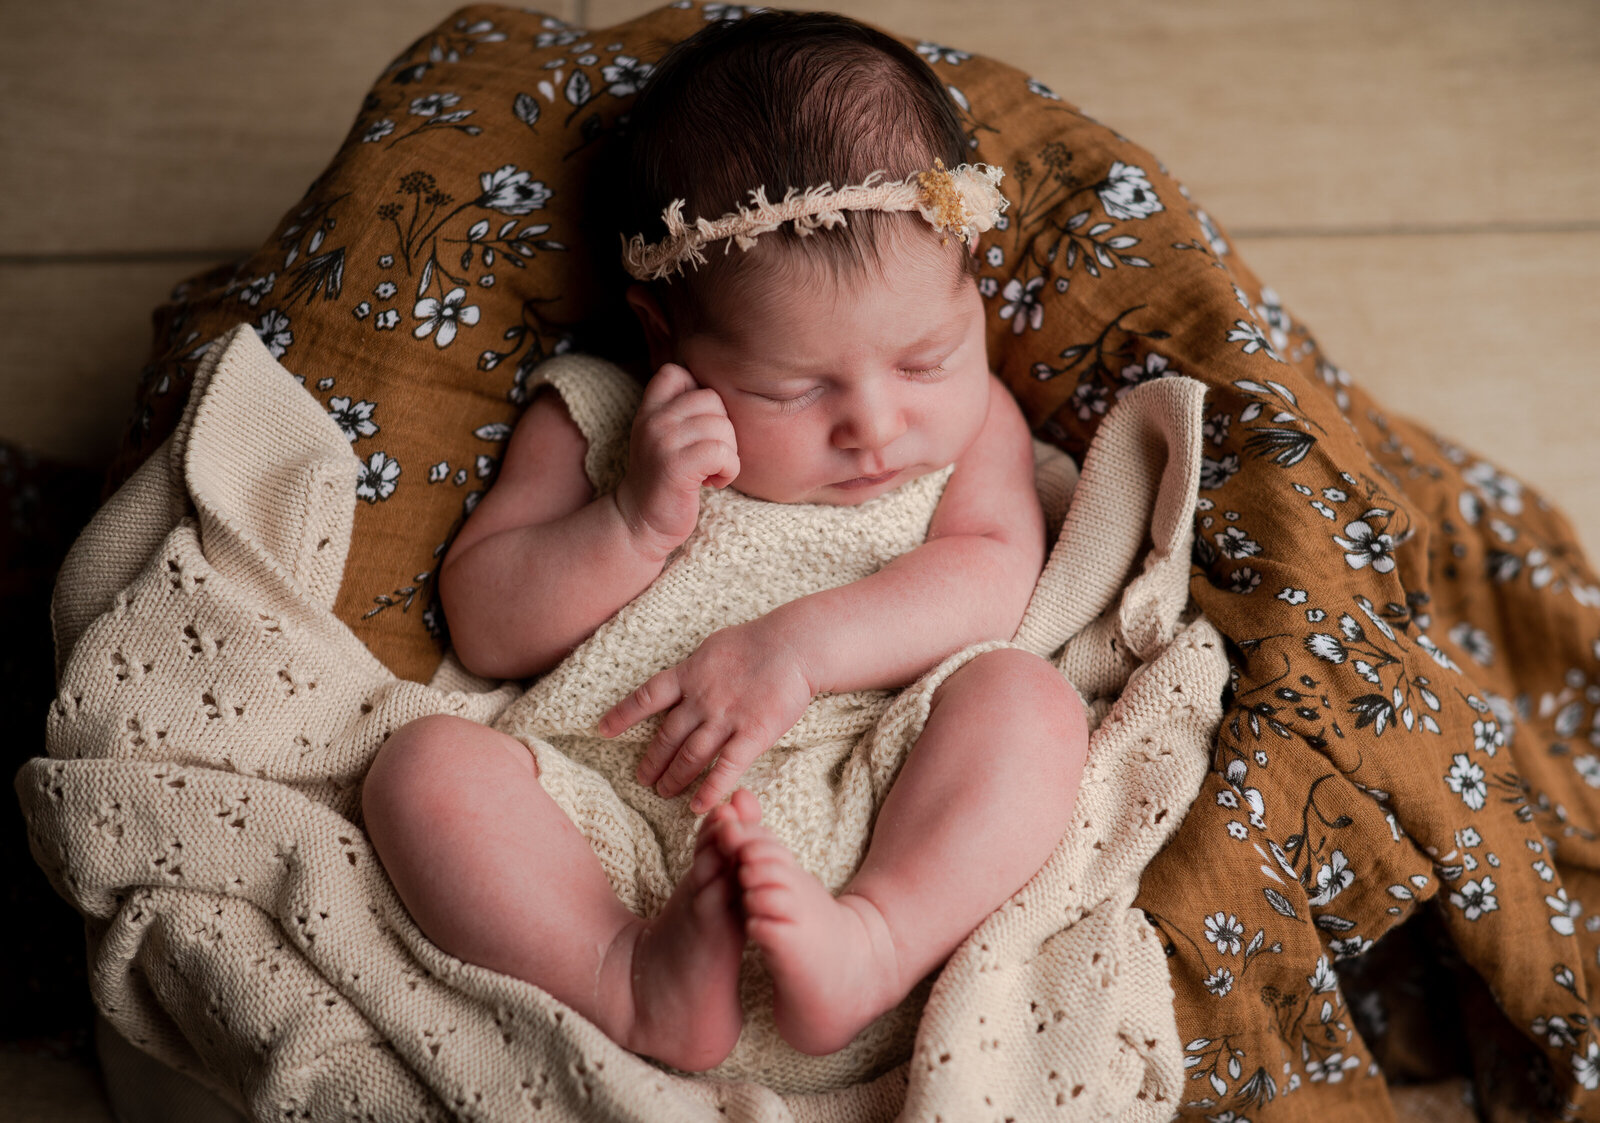 Newbaby baby sleeping in a basket on a brown floral swaddle.